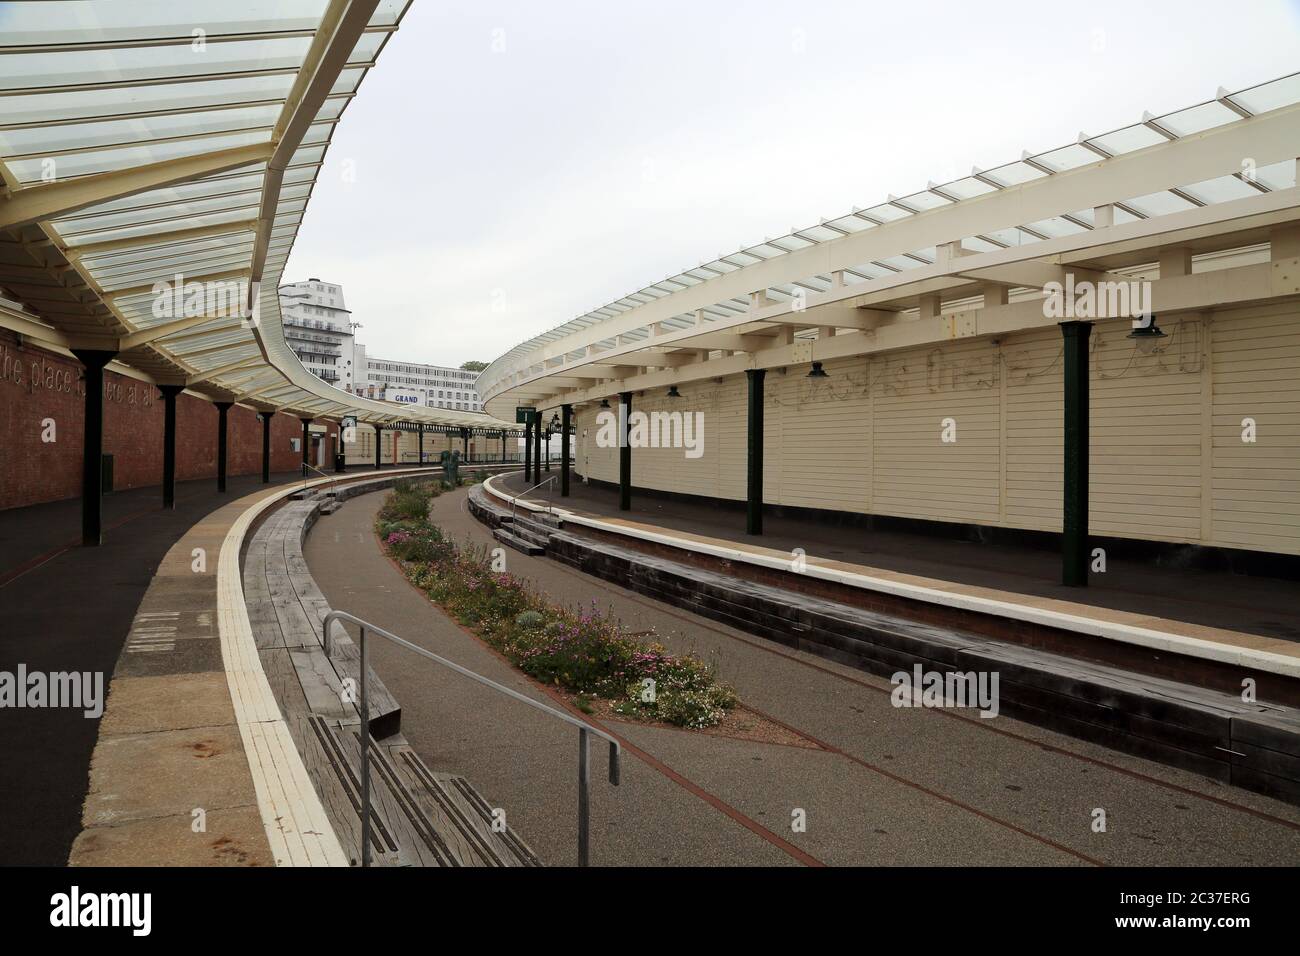 The redeveloped old railway station at Folkestone Harbour Arm, Folkestone in Kent, England Stock Photo